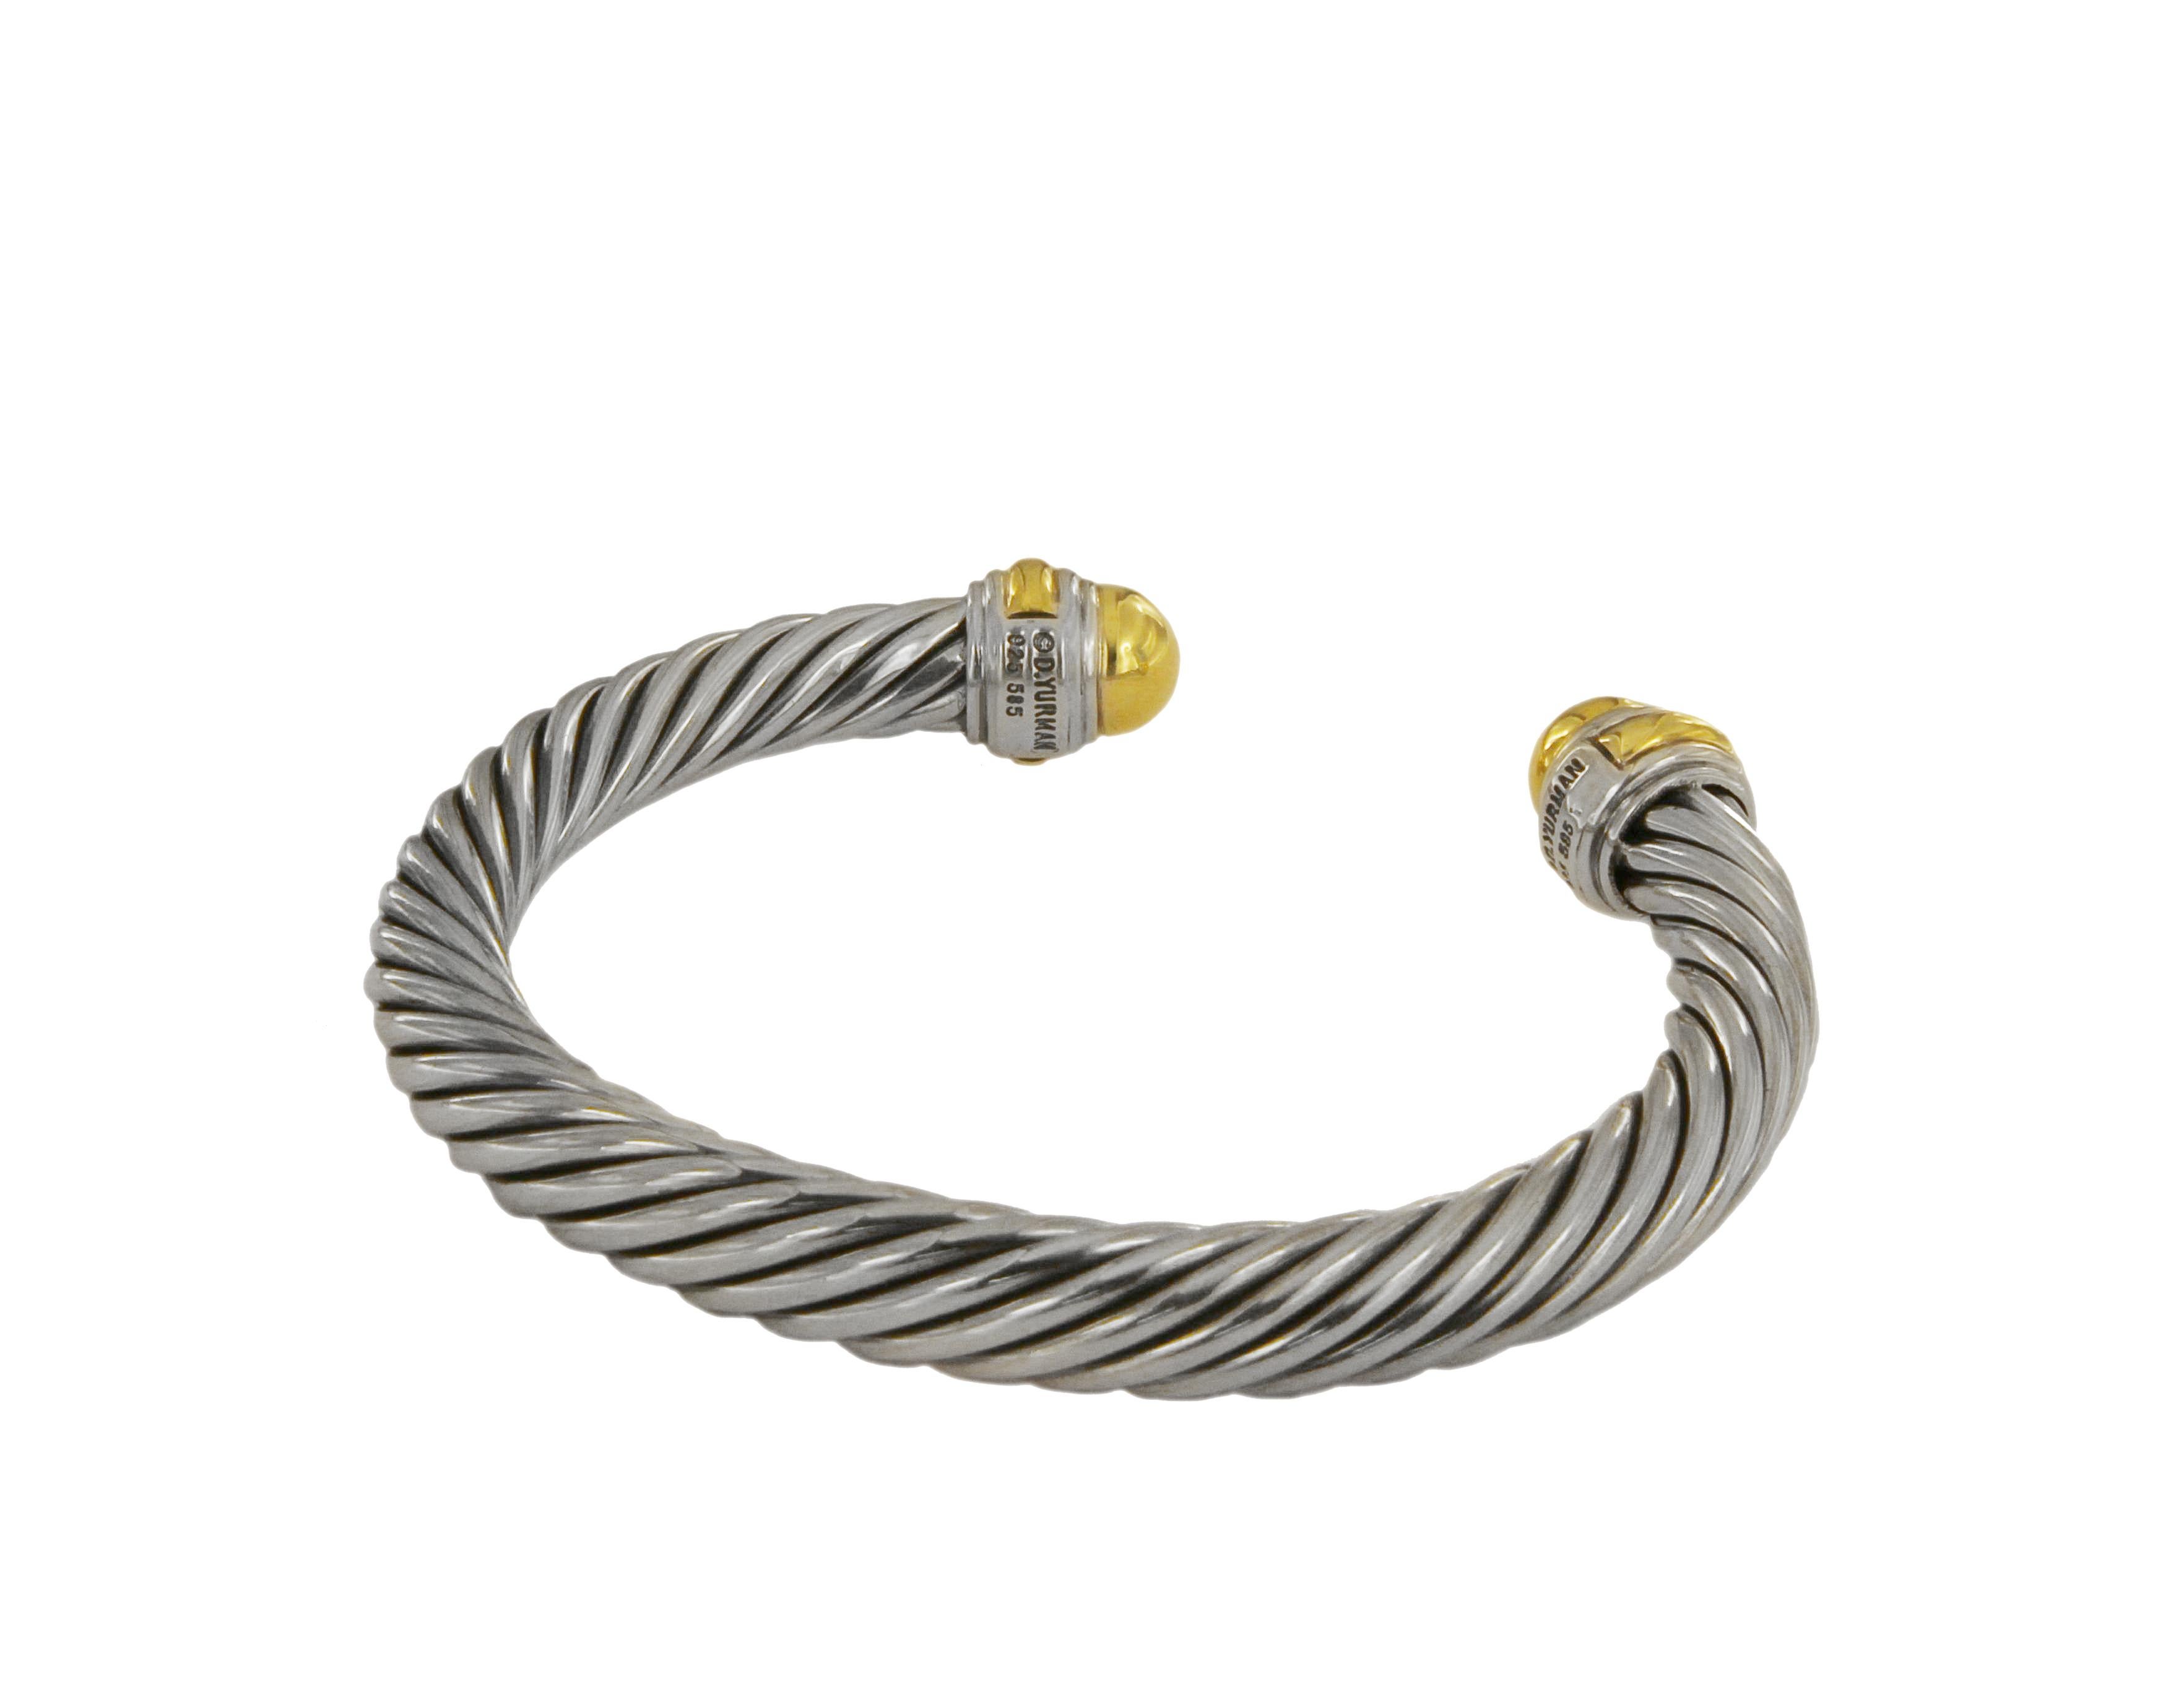 David Yurman bangle from the Cable Collection.
Mint condition
Sterling silver & 14k Yellow Gold
Width: 7mm
Medium size
Comes with David Yurman pouch
Retail: 825